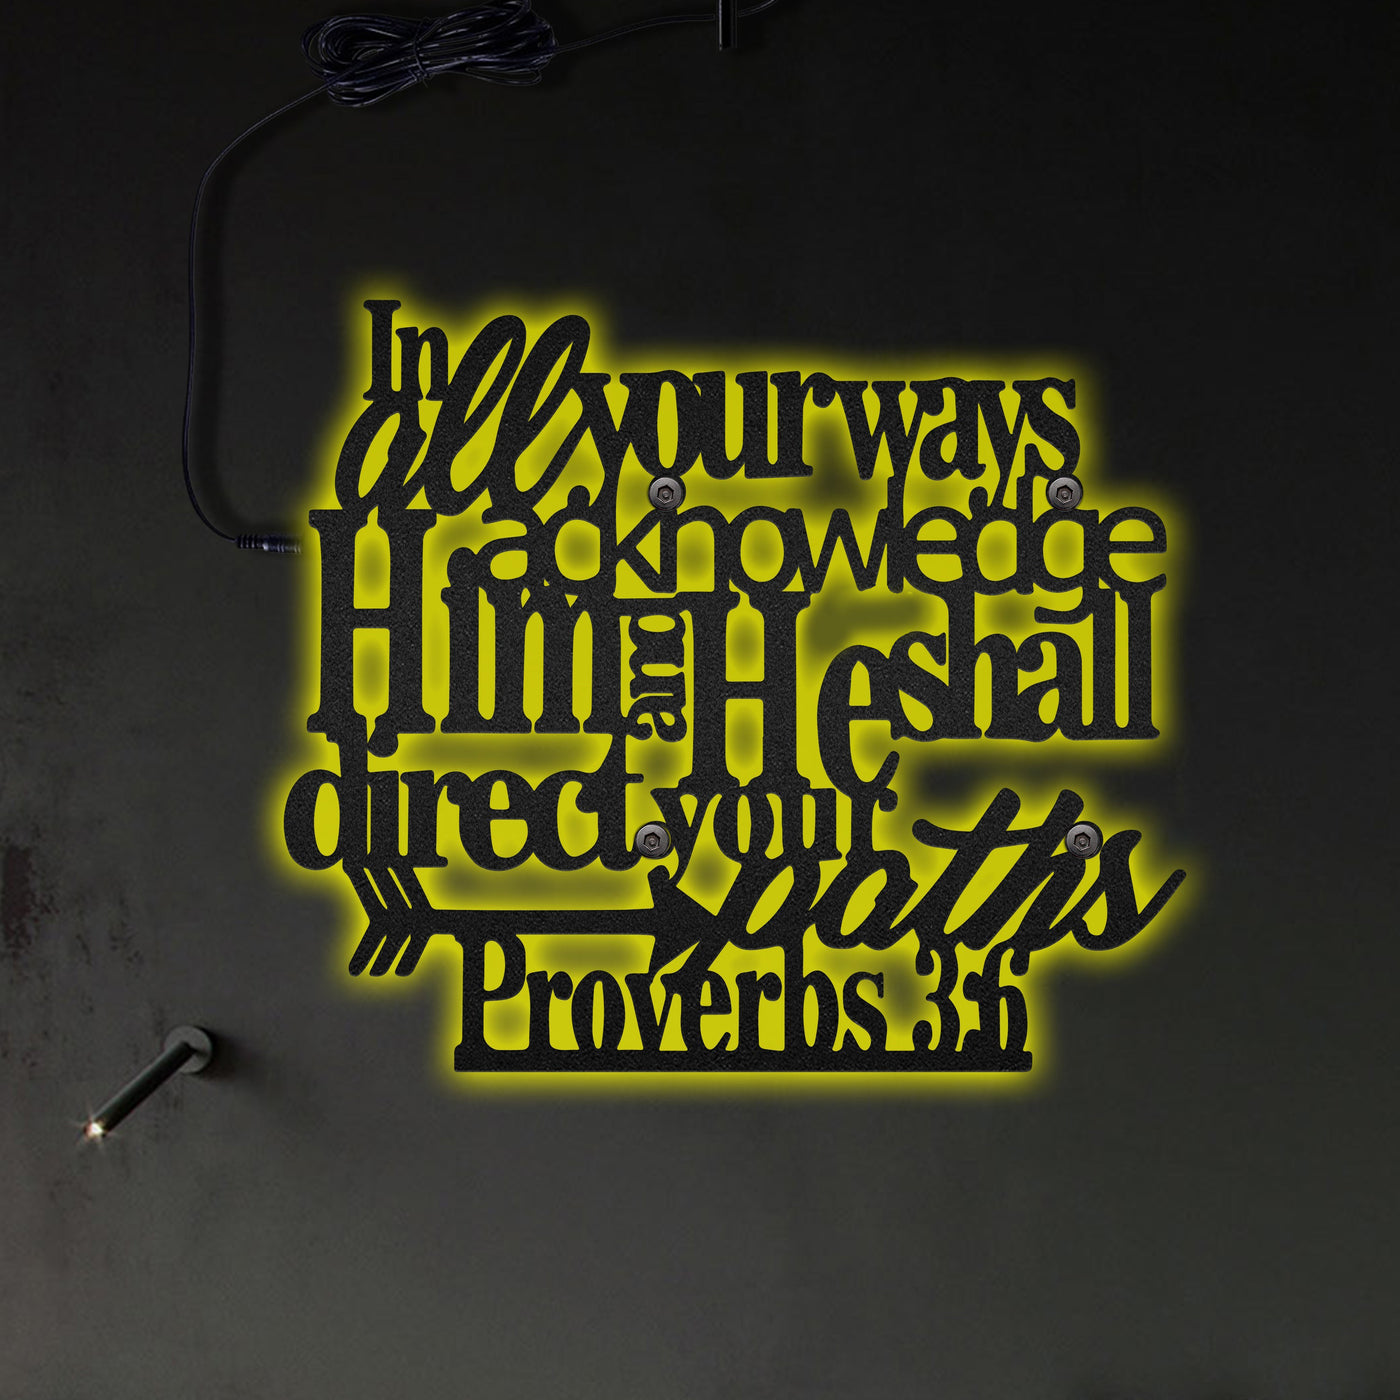 Jesus In All Your Ways Acknowledge Him And He Shall Direct Your Paths Proverbs - Led Light Metal - Owls Matrix LTD